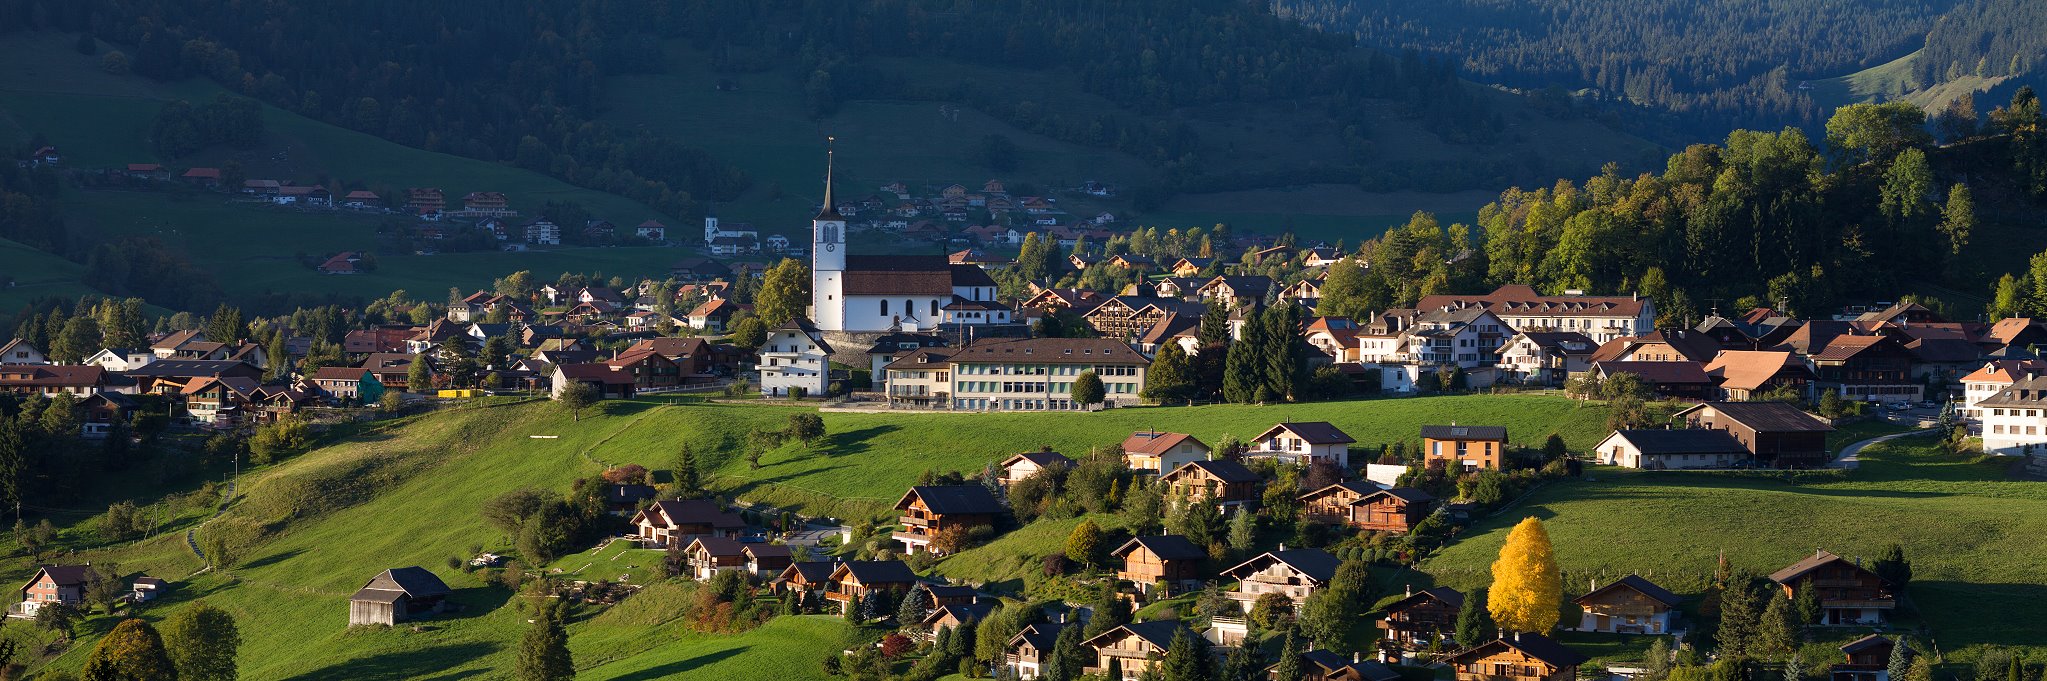 The village of Charmey in the Swiss Prealps.